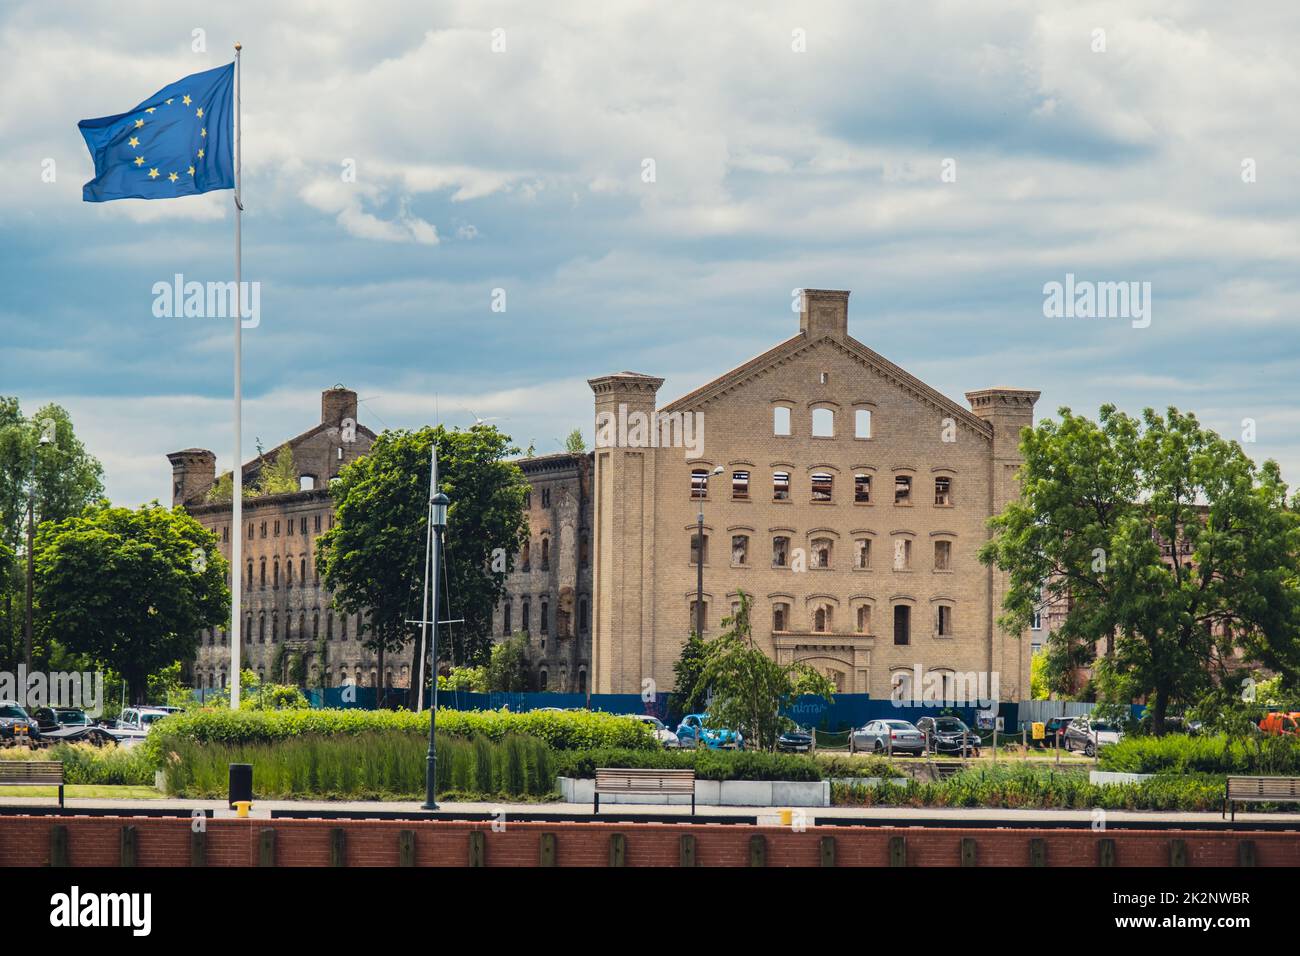 The EU Flag hanging on the pole, with an abandoned harbor building in the background Stock Photo